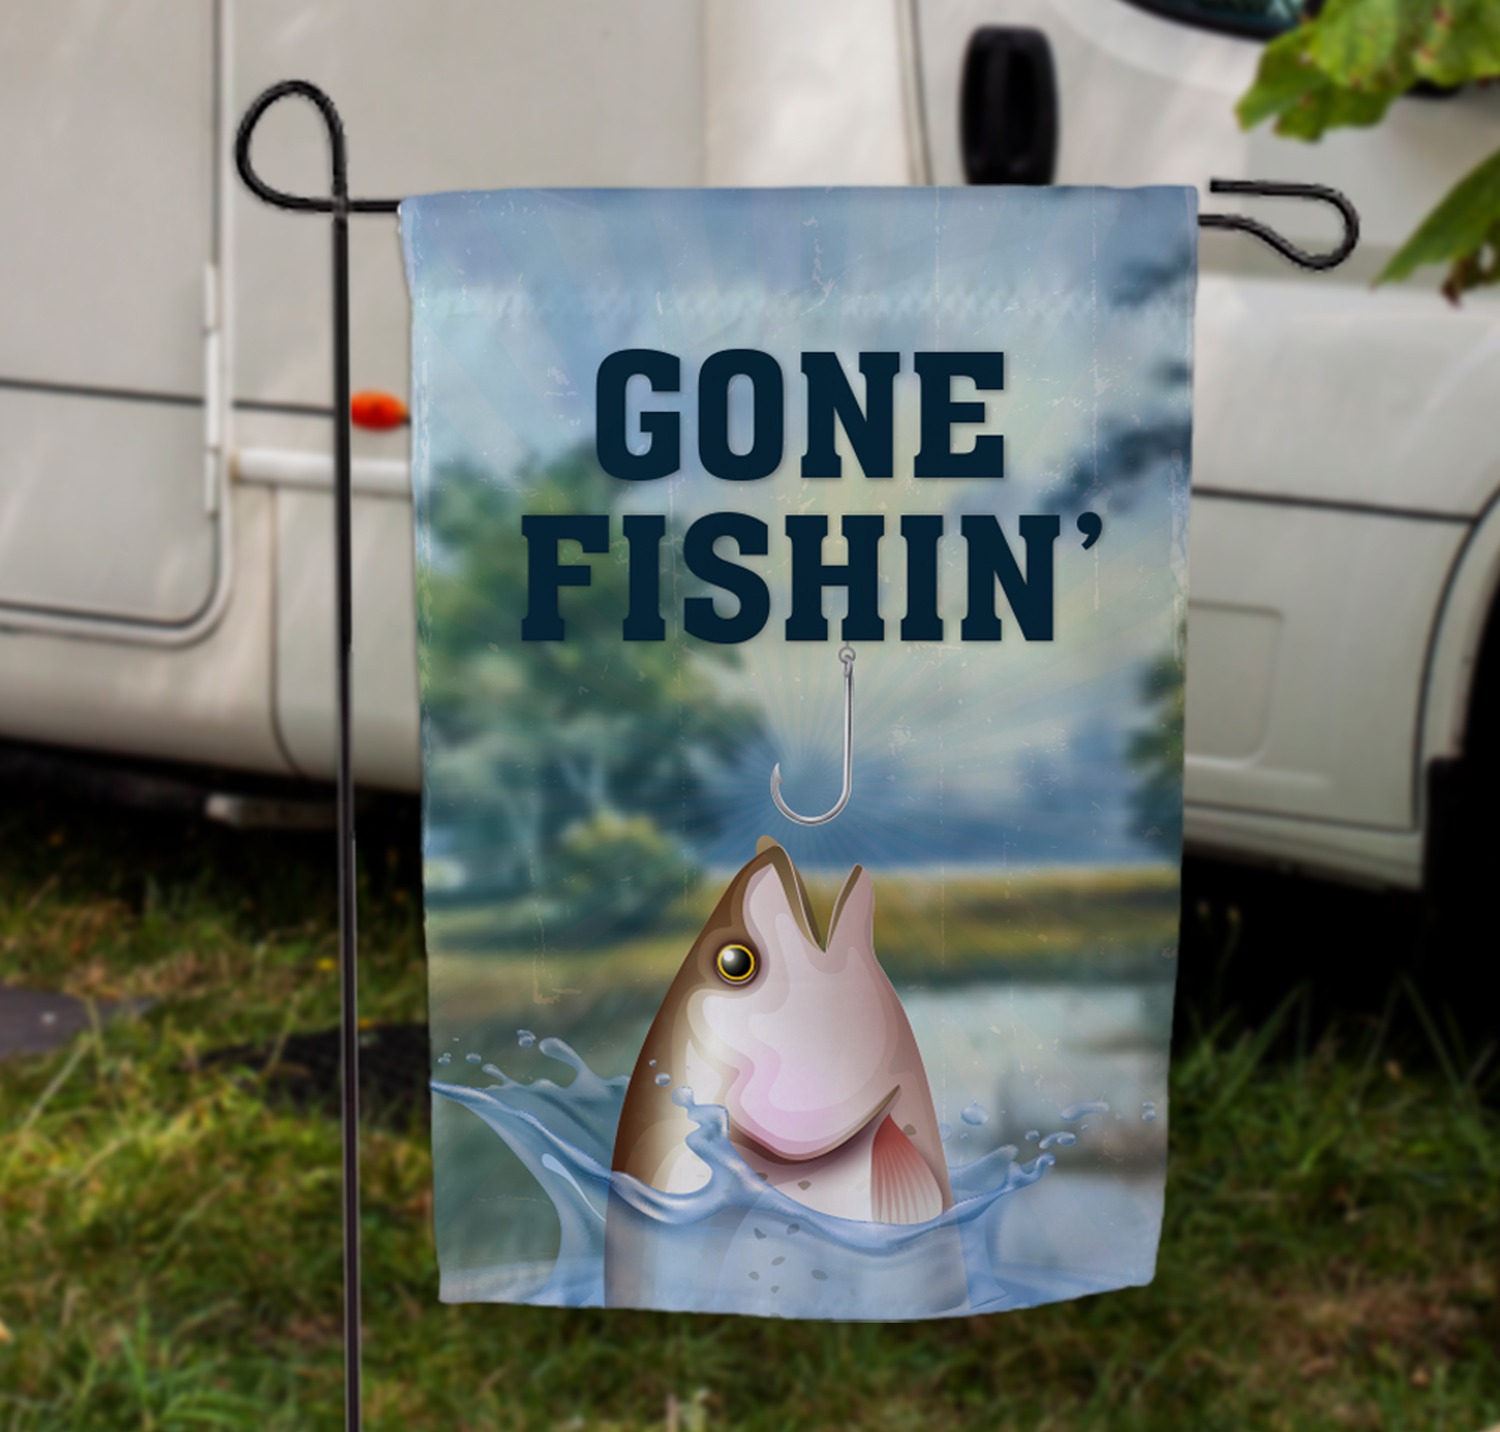 Garden flag customized with a fish and Gone Fishin'